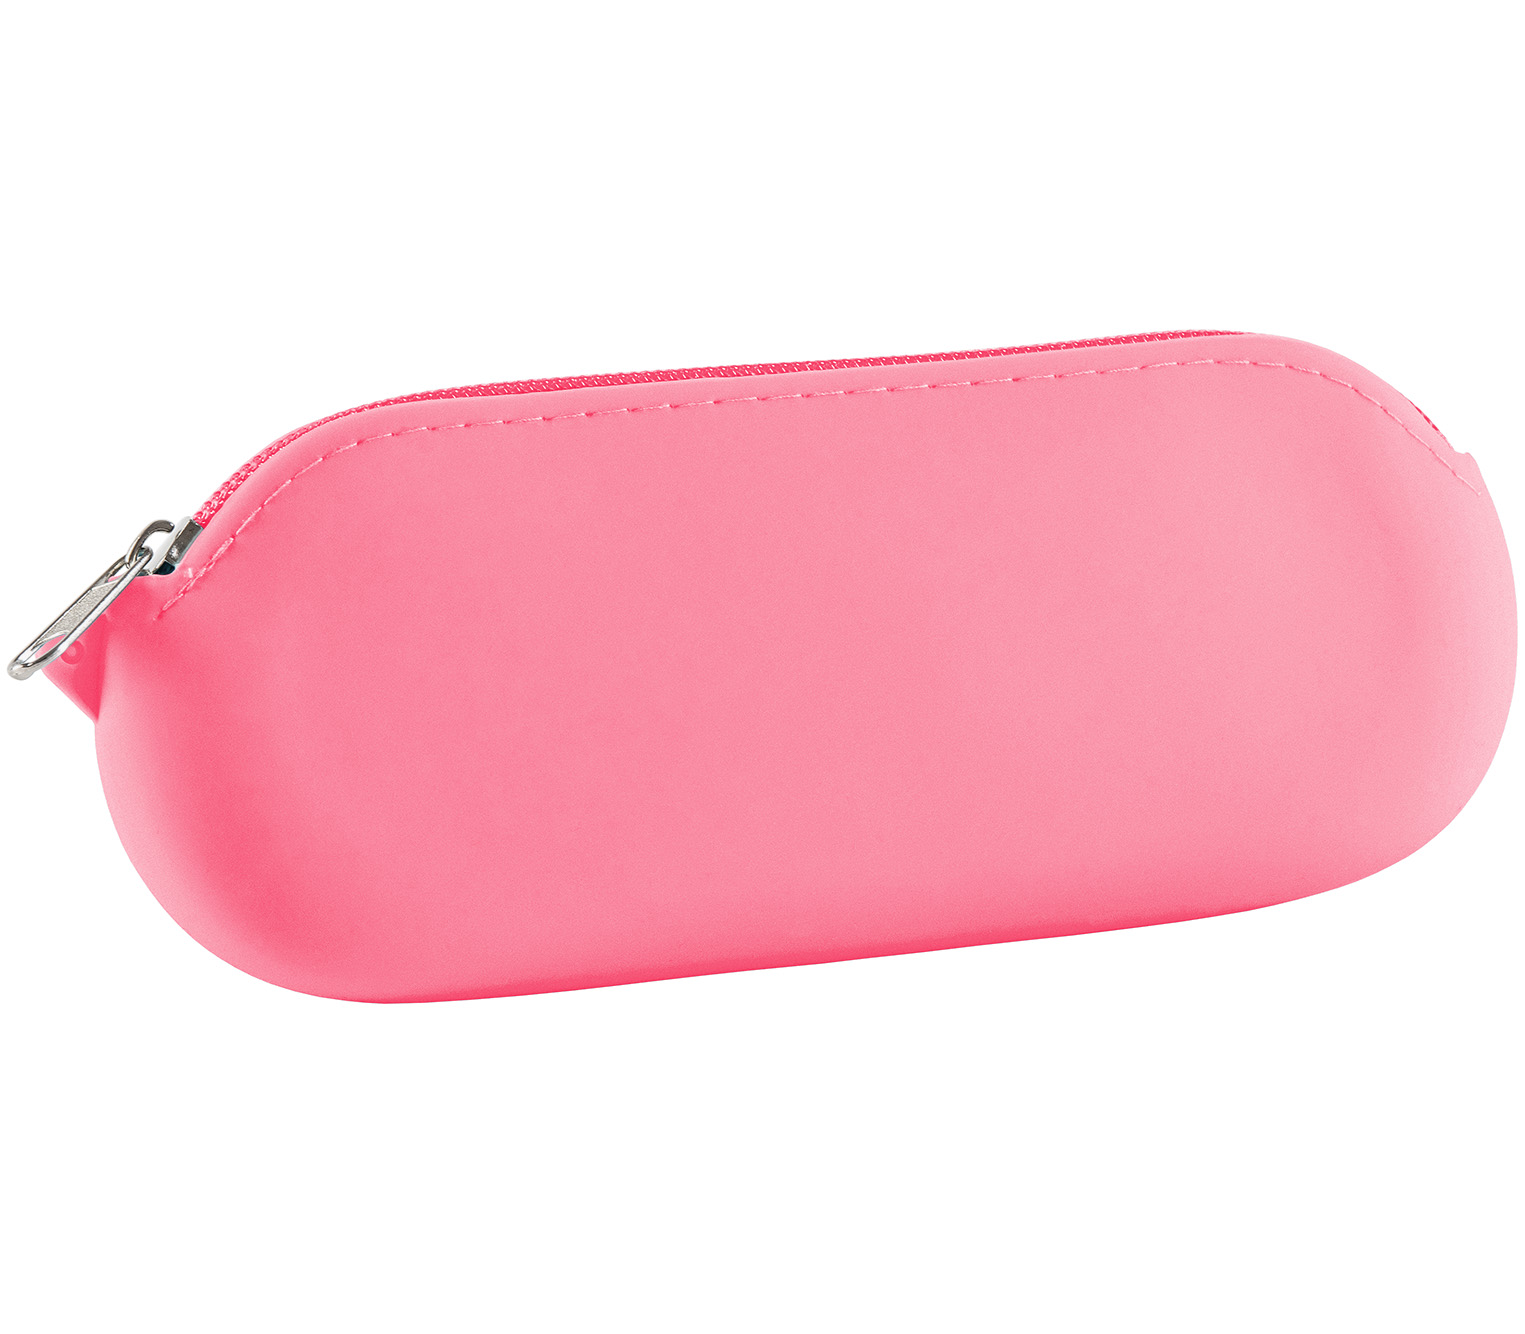 Main Image (Angle) - Buzz (Pink) Glasses Cases Accessories